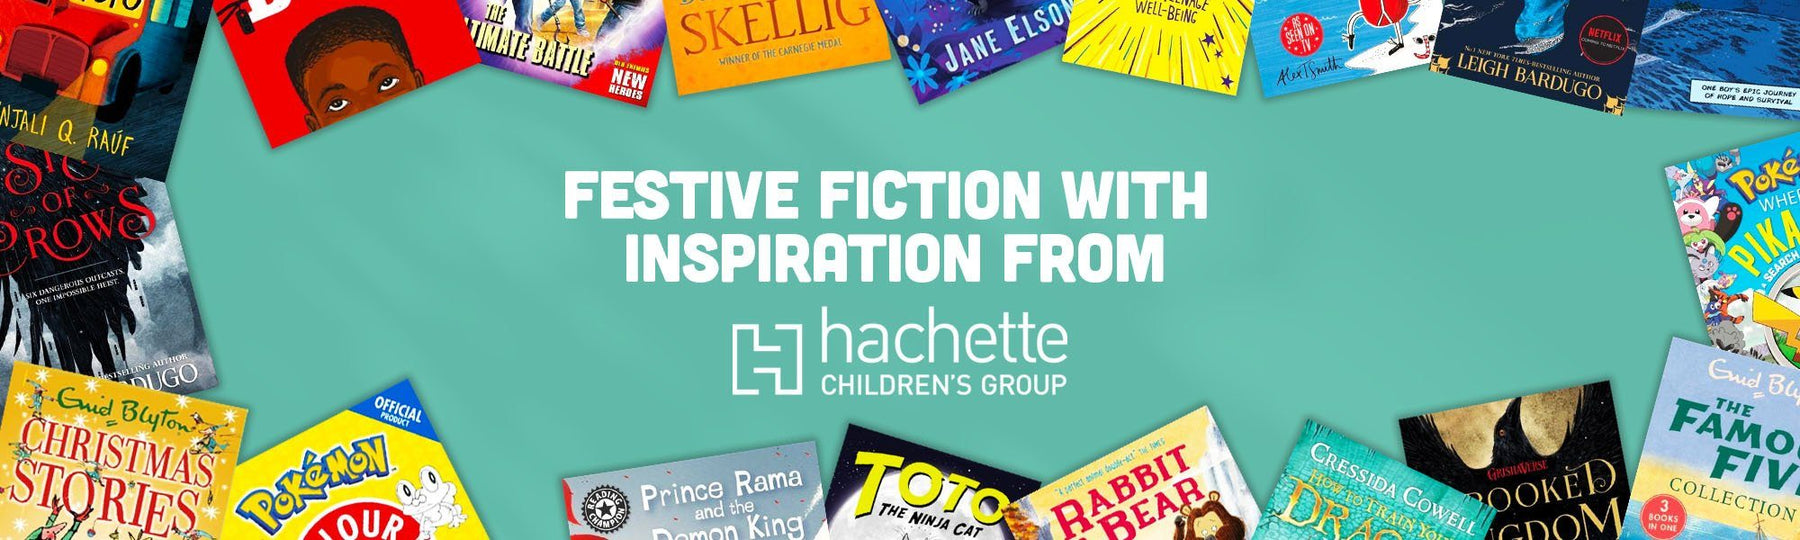 Festive fiction with inspiration from Hachette Children’s Group